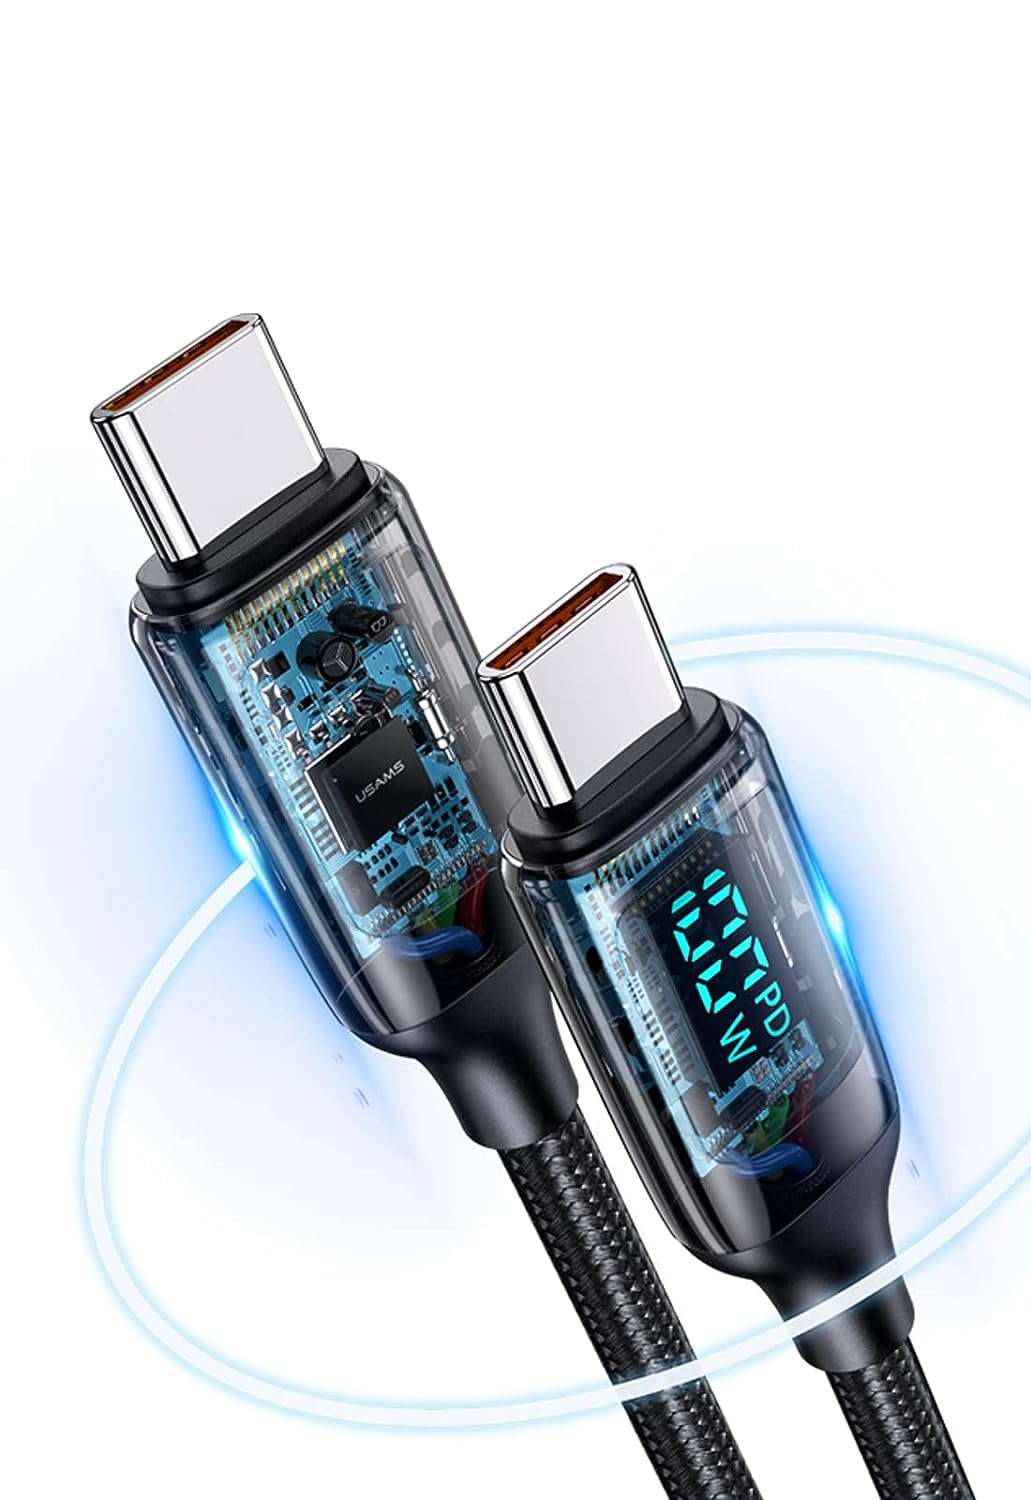 Usams US-SJ546 Digital Display Chip, Braided, 1.2 m PD 100 W Type-C Fast Charging and Data Cable